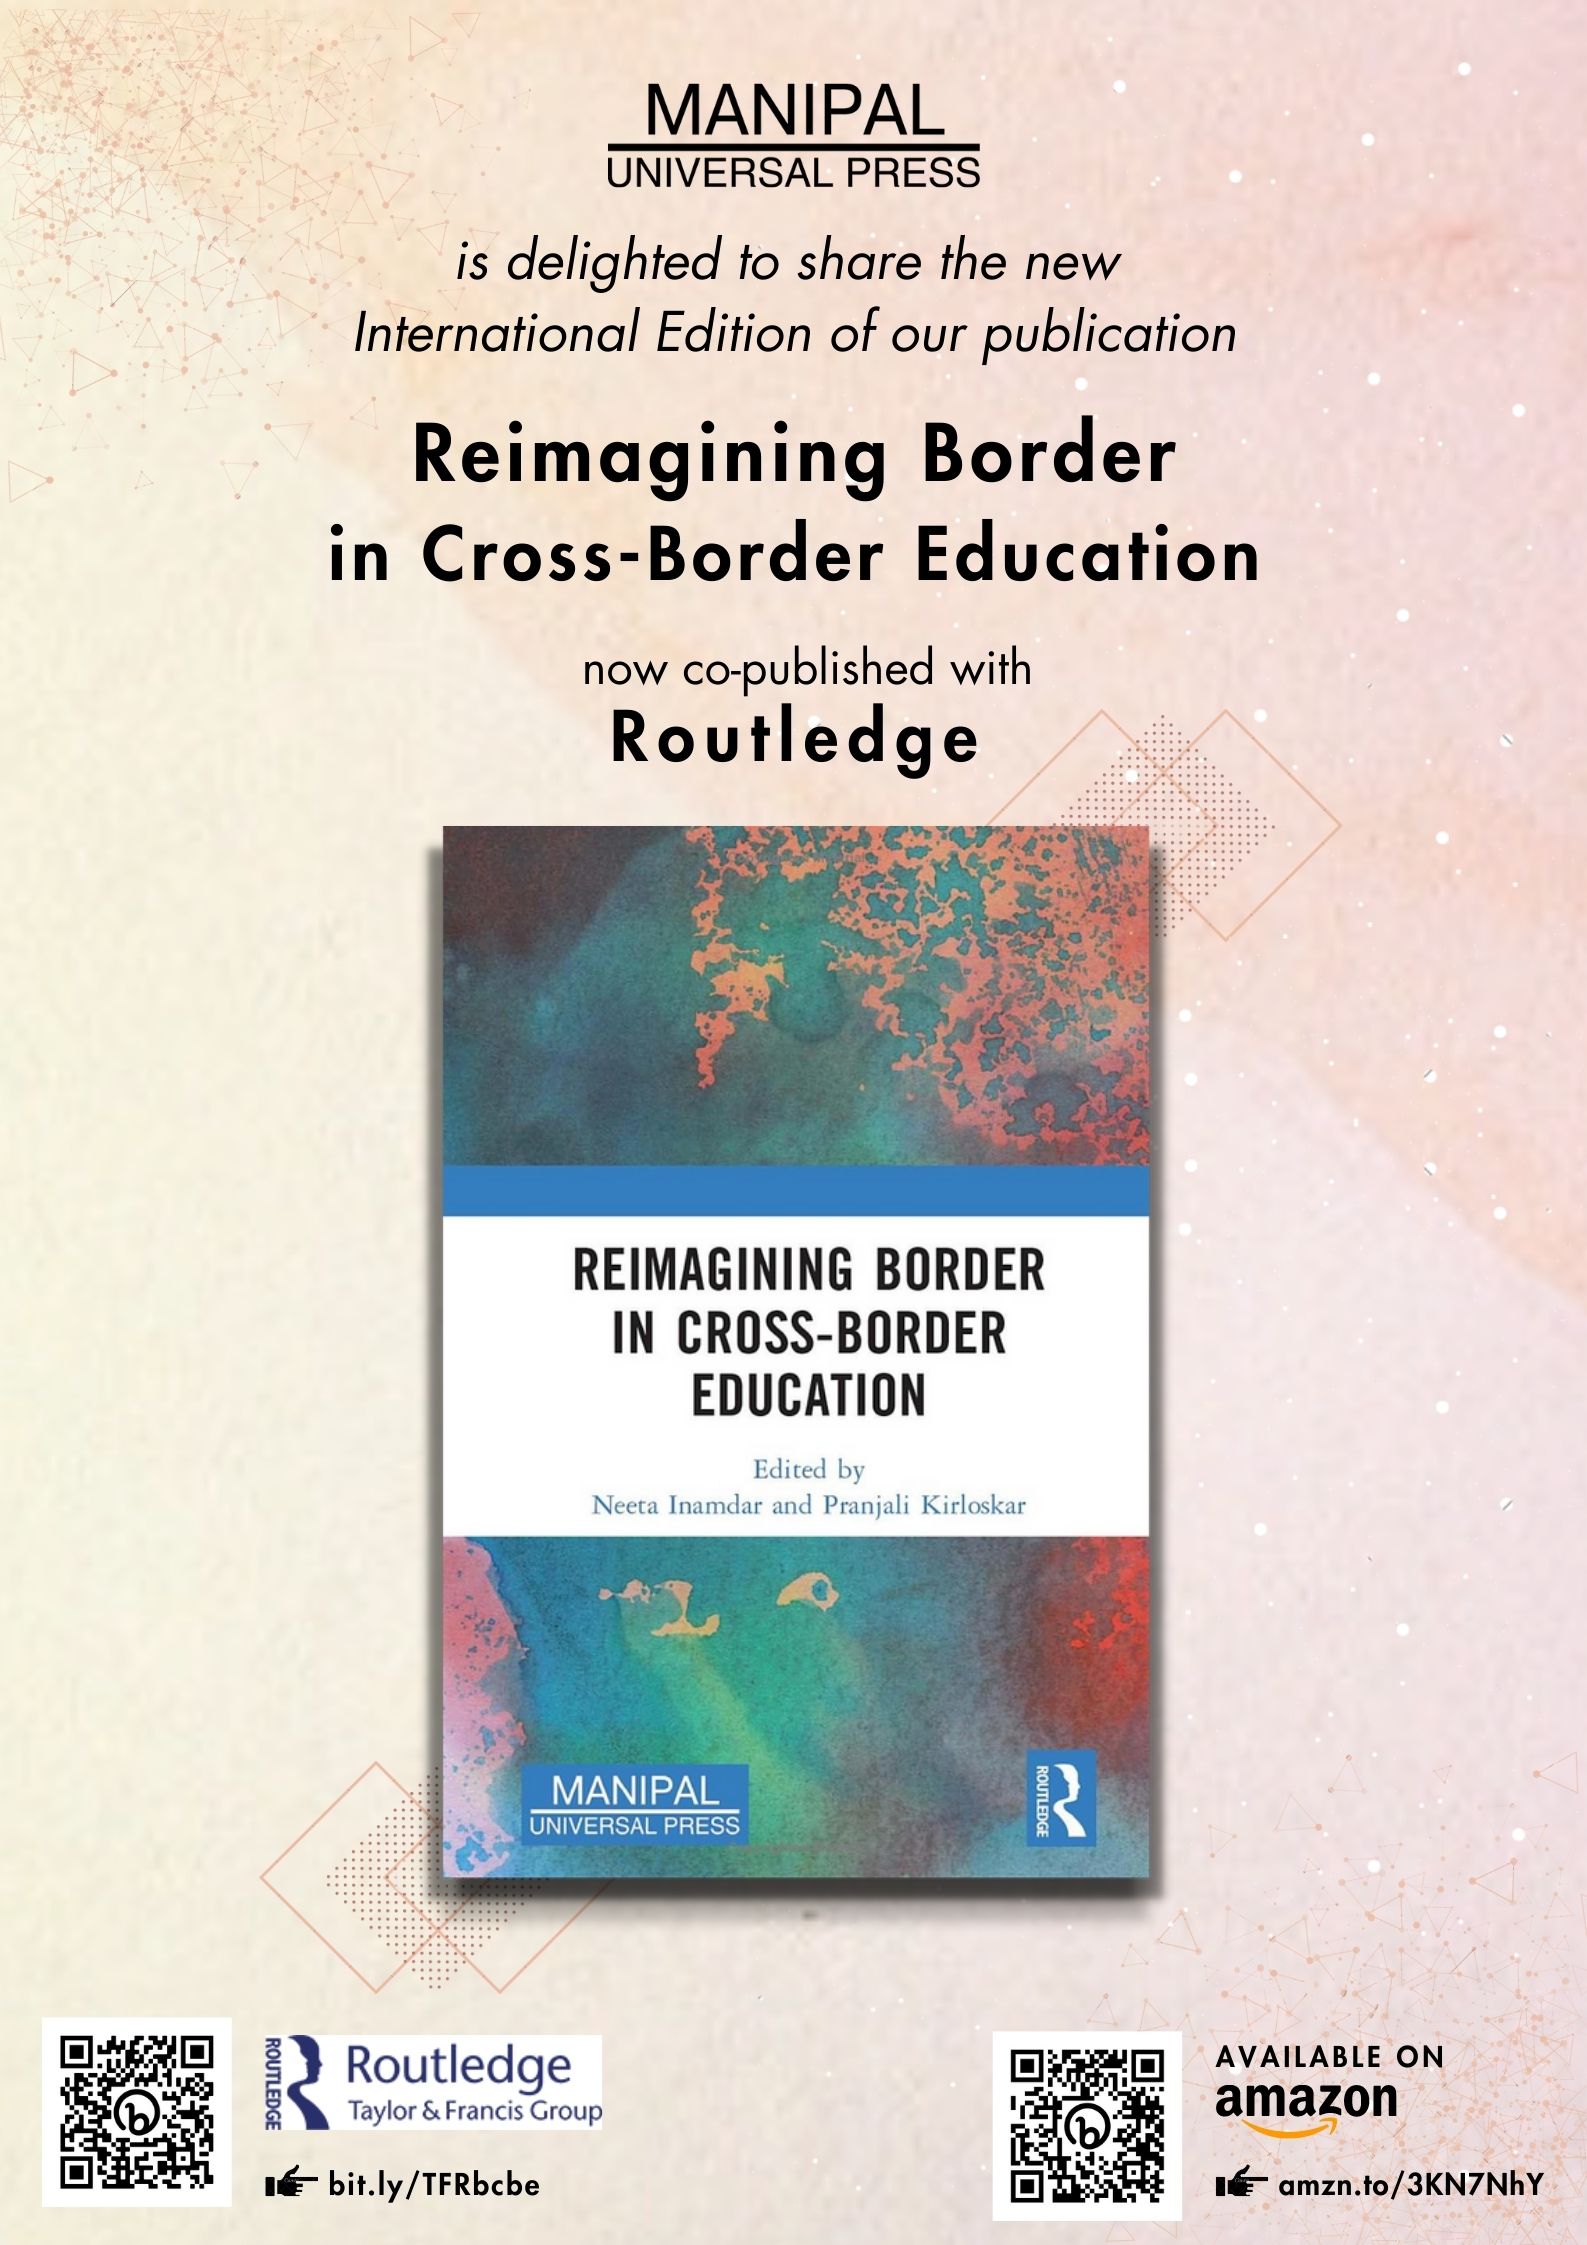 We are Excited to share “Reimagining Border in Cross-Border Education” International edition, co-published with Routledge.